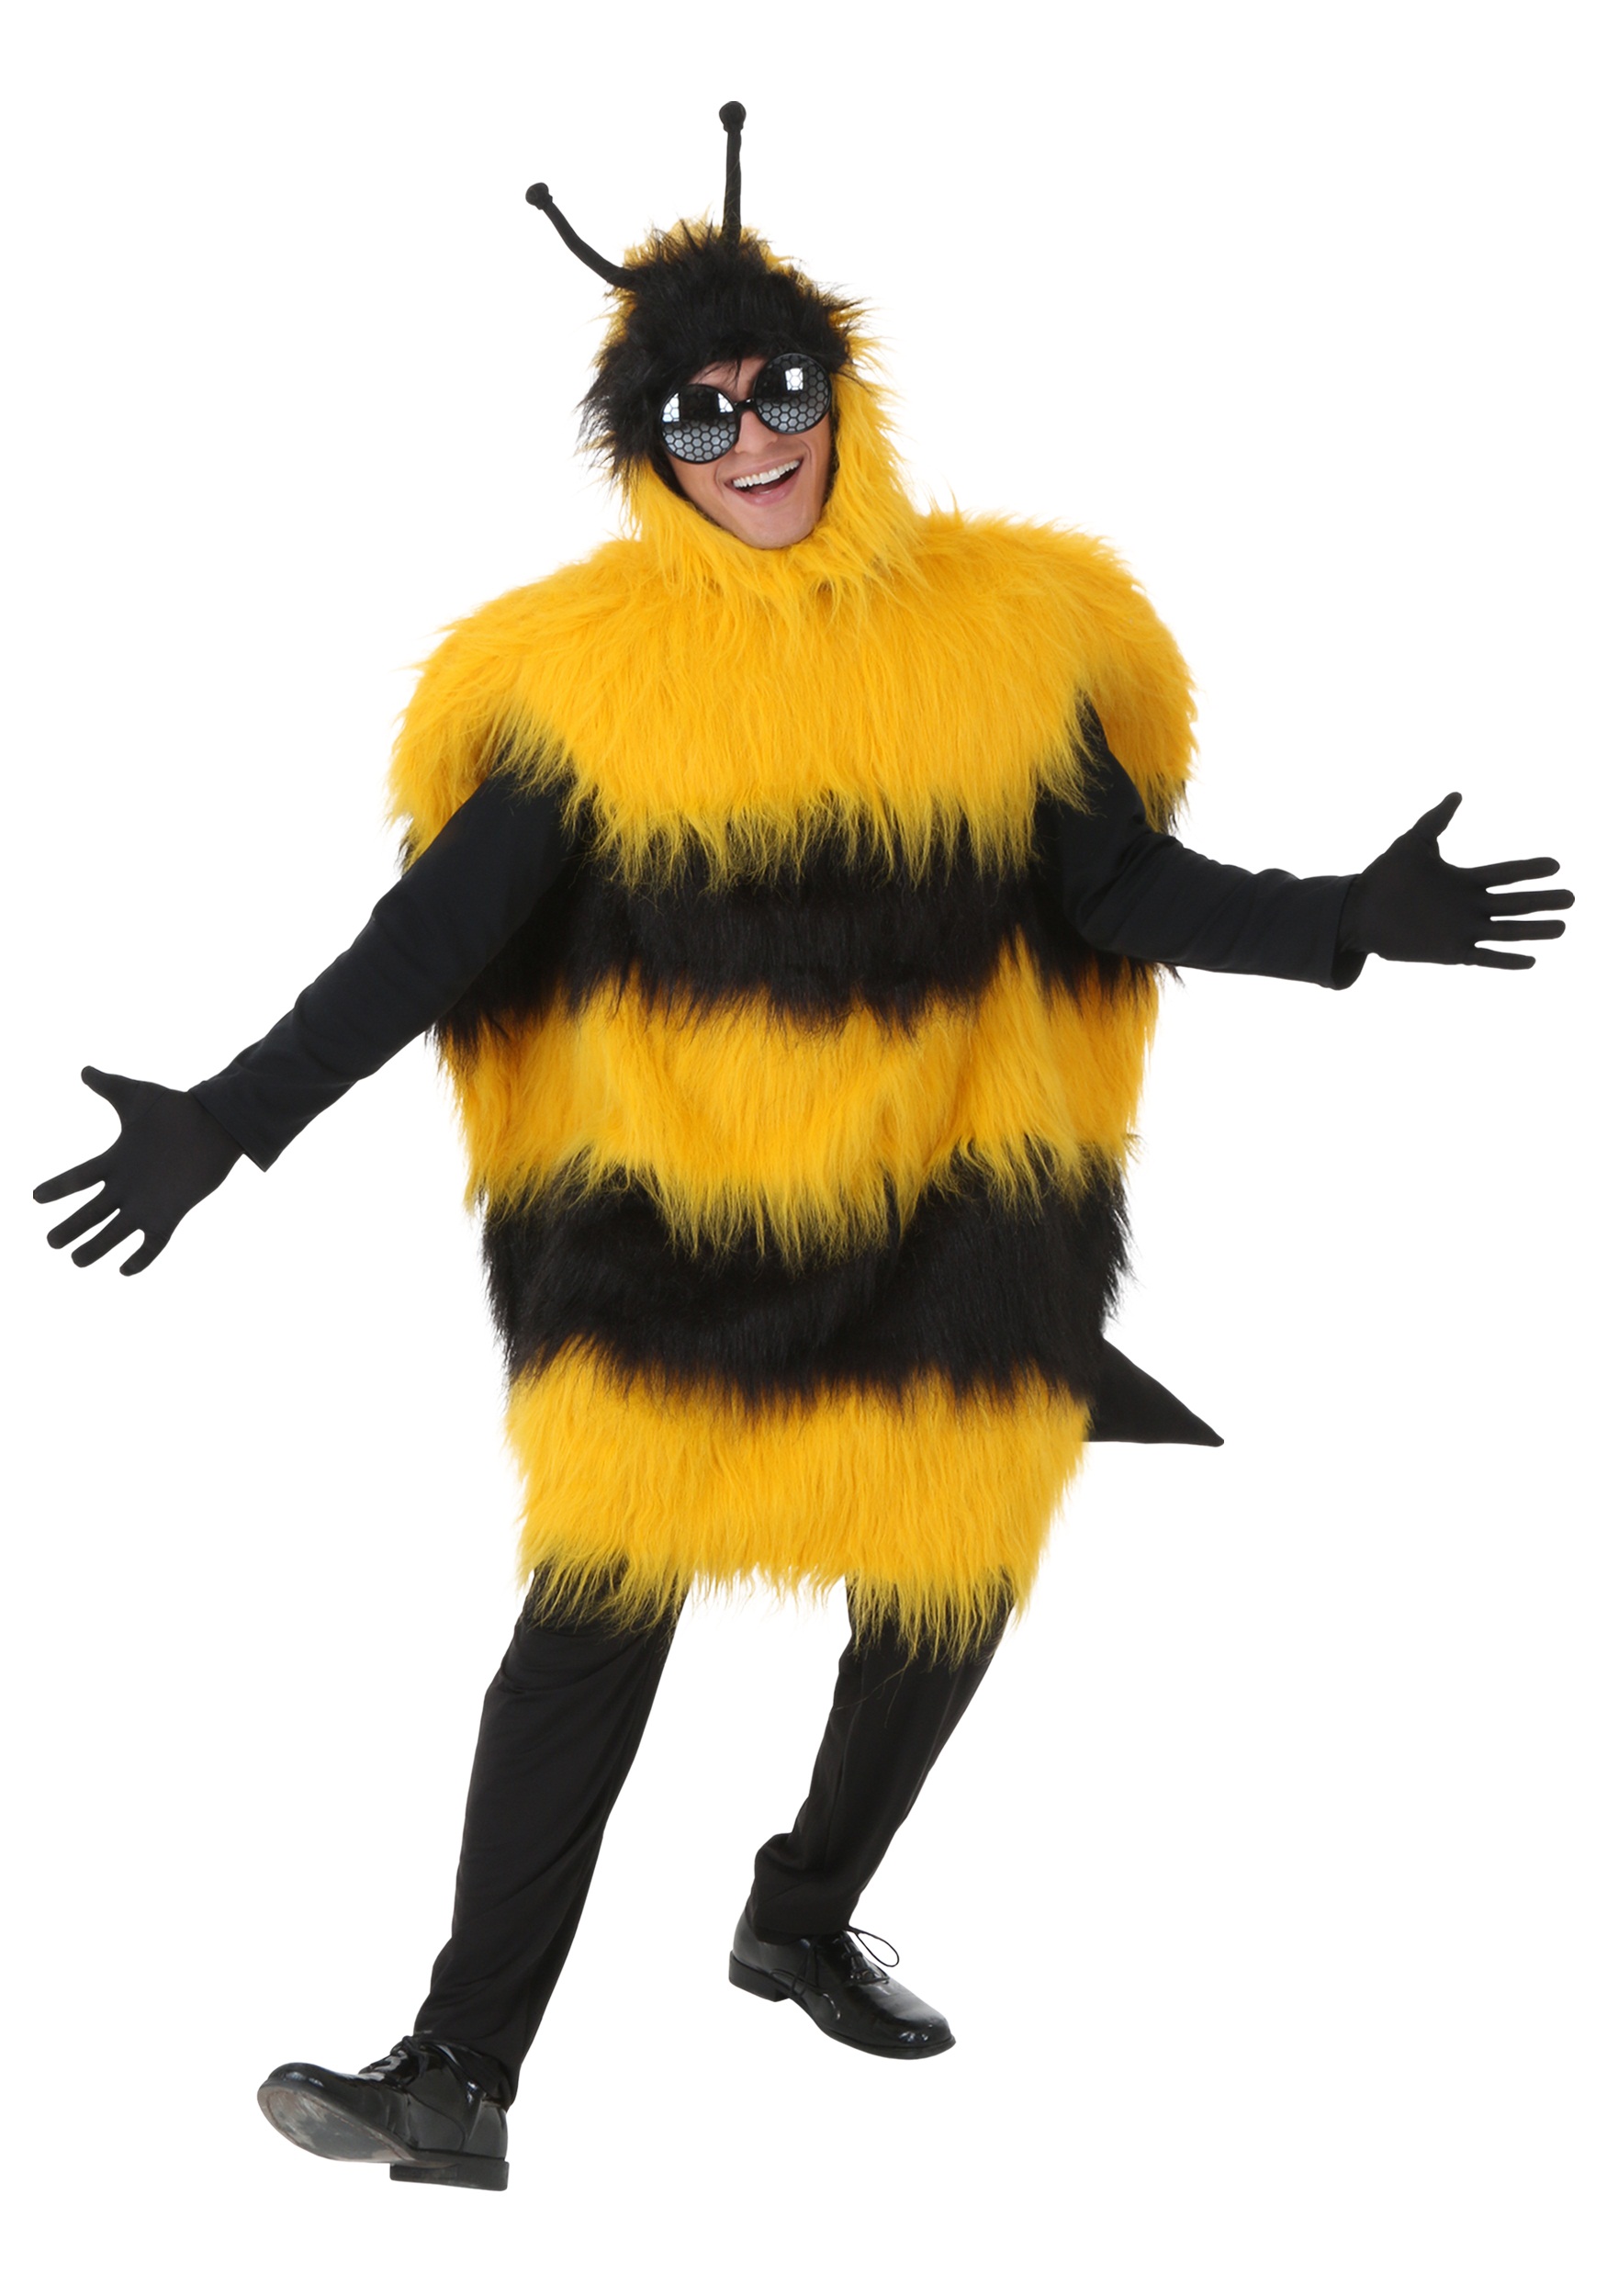 Photos - Fancy Dress Deluxe FUN Costumes  Bumblebee Costume for Adults | Bug Halloween Costumes 